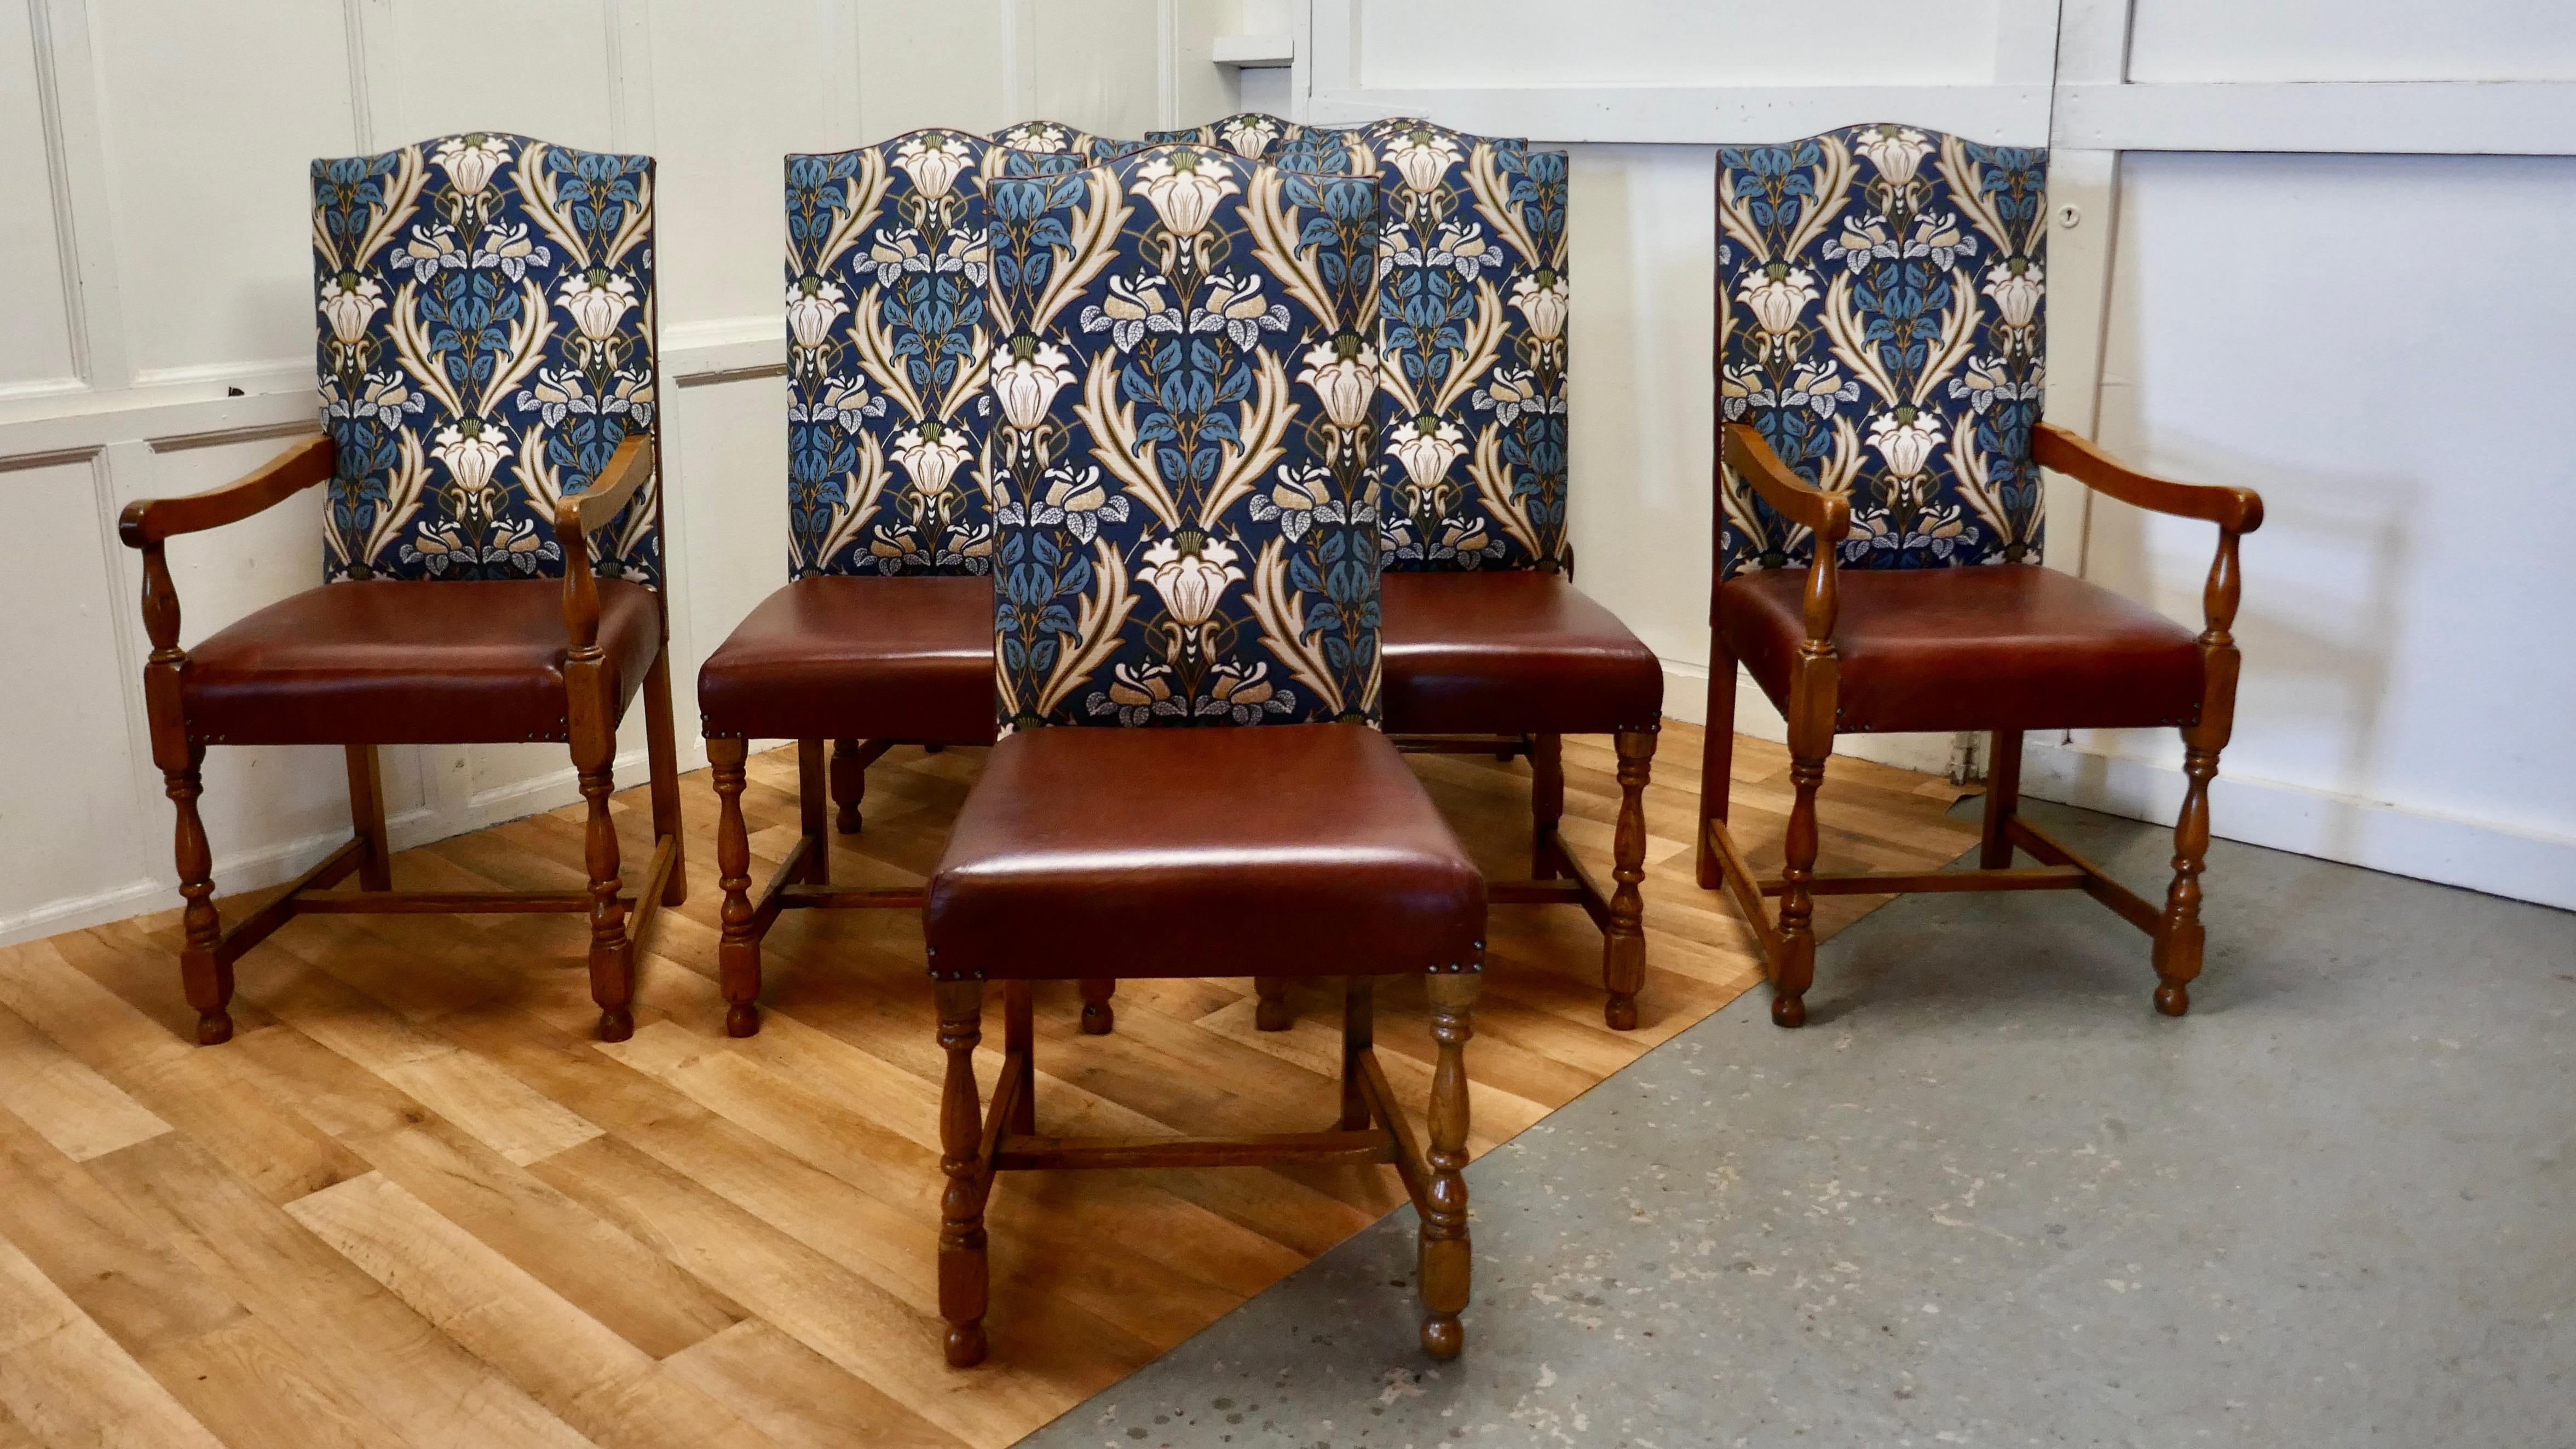 A set of eight Arts & Crafts golden oak dining chairs 

A Very Good Quality set of Large High Back Arts & Crafts Oak Dining Chairs there are a pair of carver chairs and six singles, the seats are upholstered in good quality soft tan leather, the